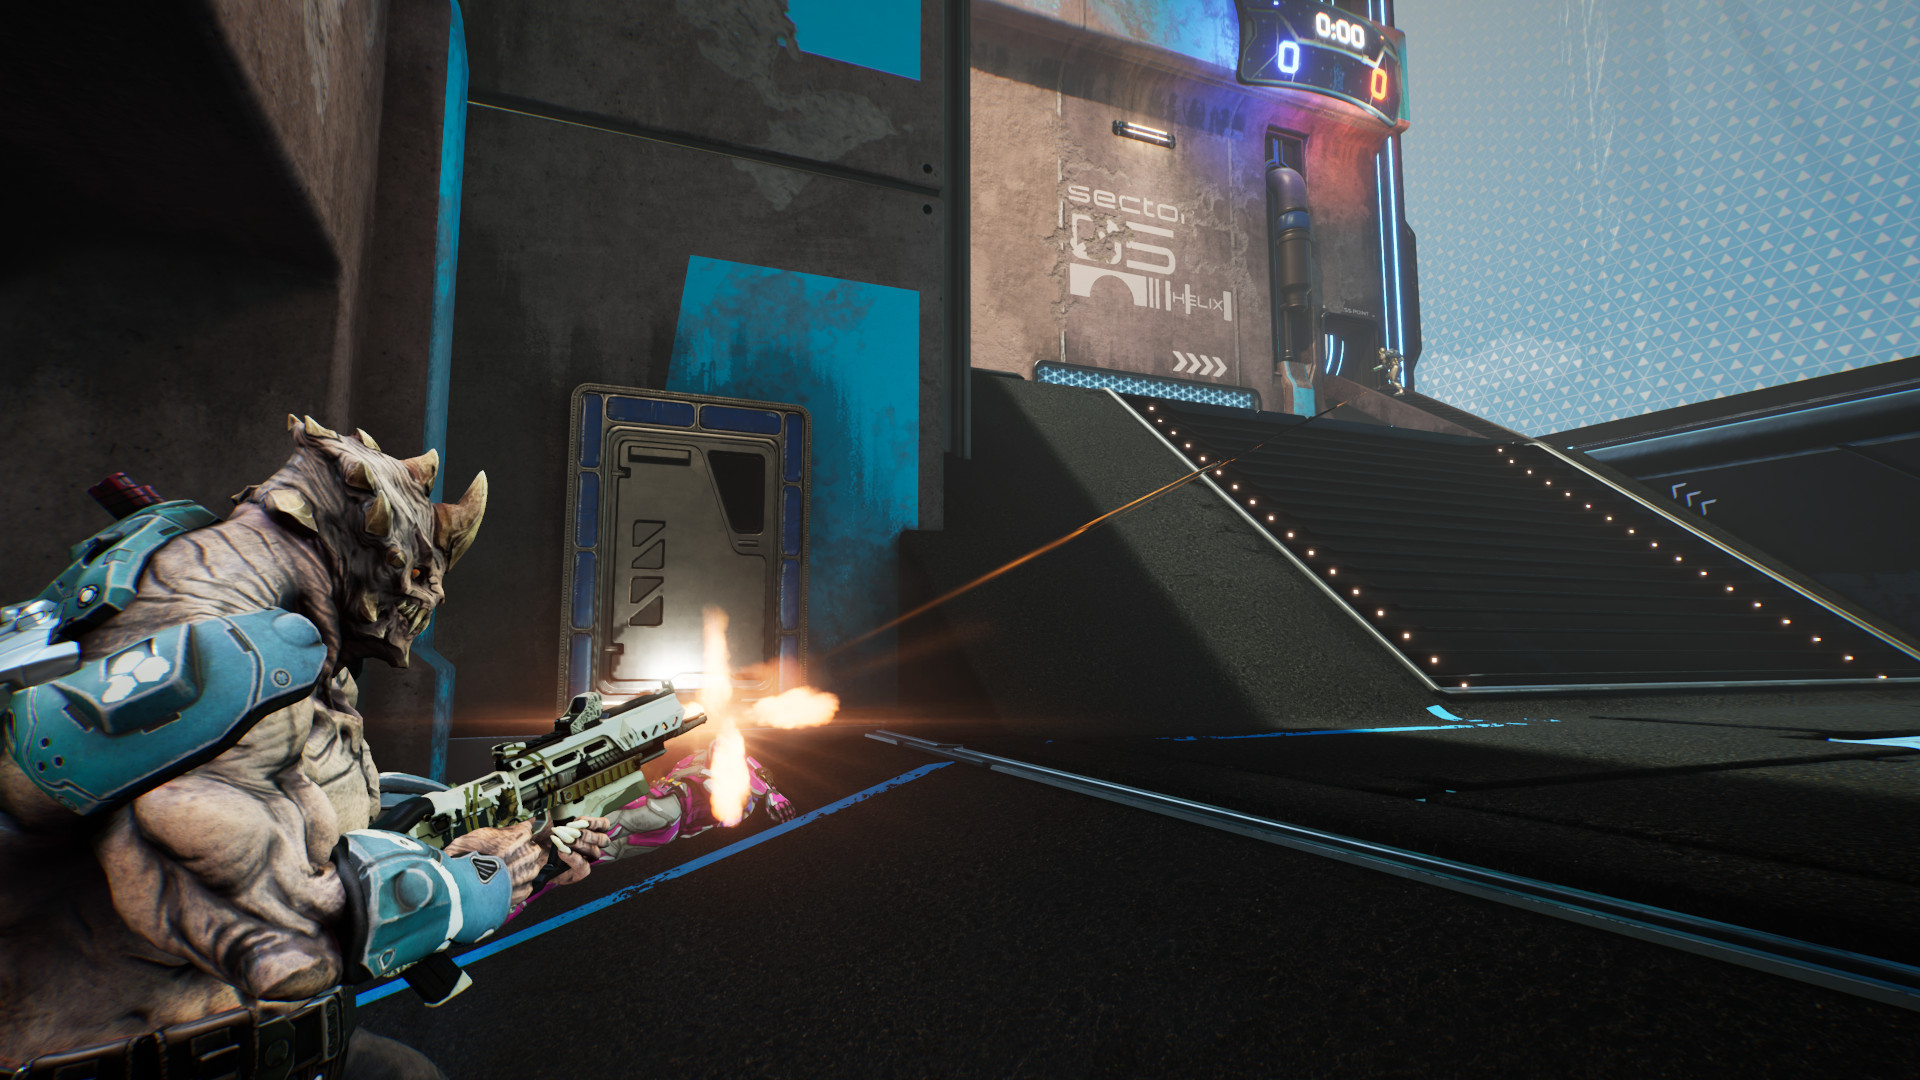 Splitgate Open Beta Trailer  PlayStation, Xbox, and PC July 13th with  Cross-Play! 